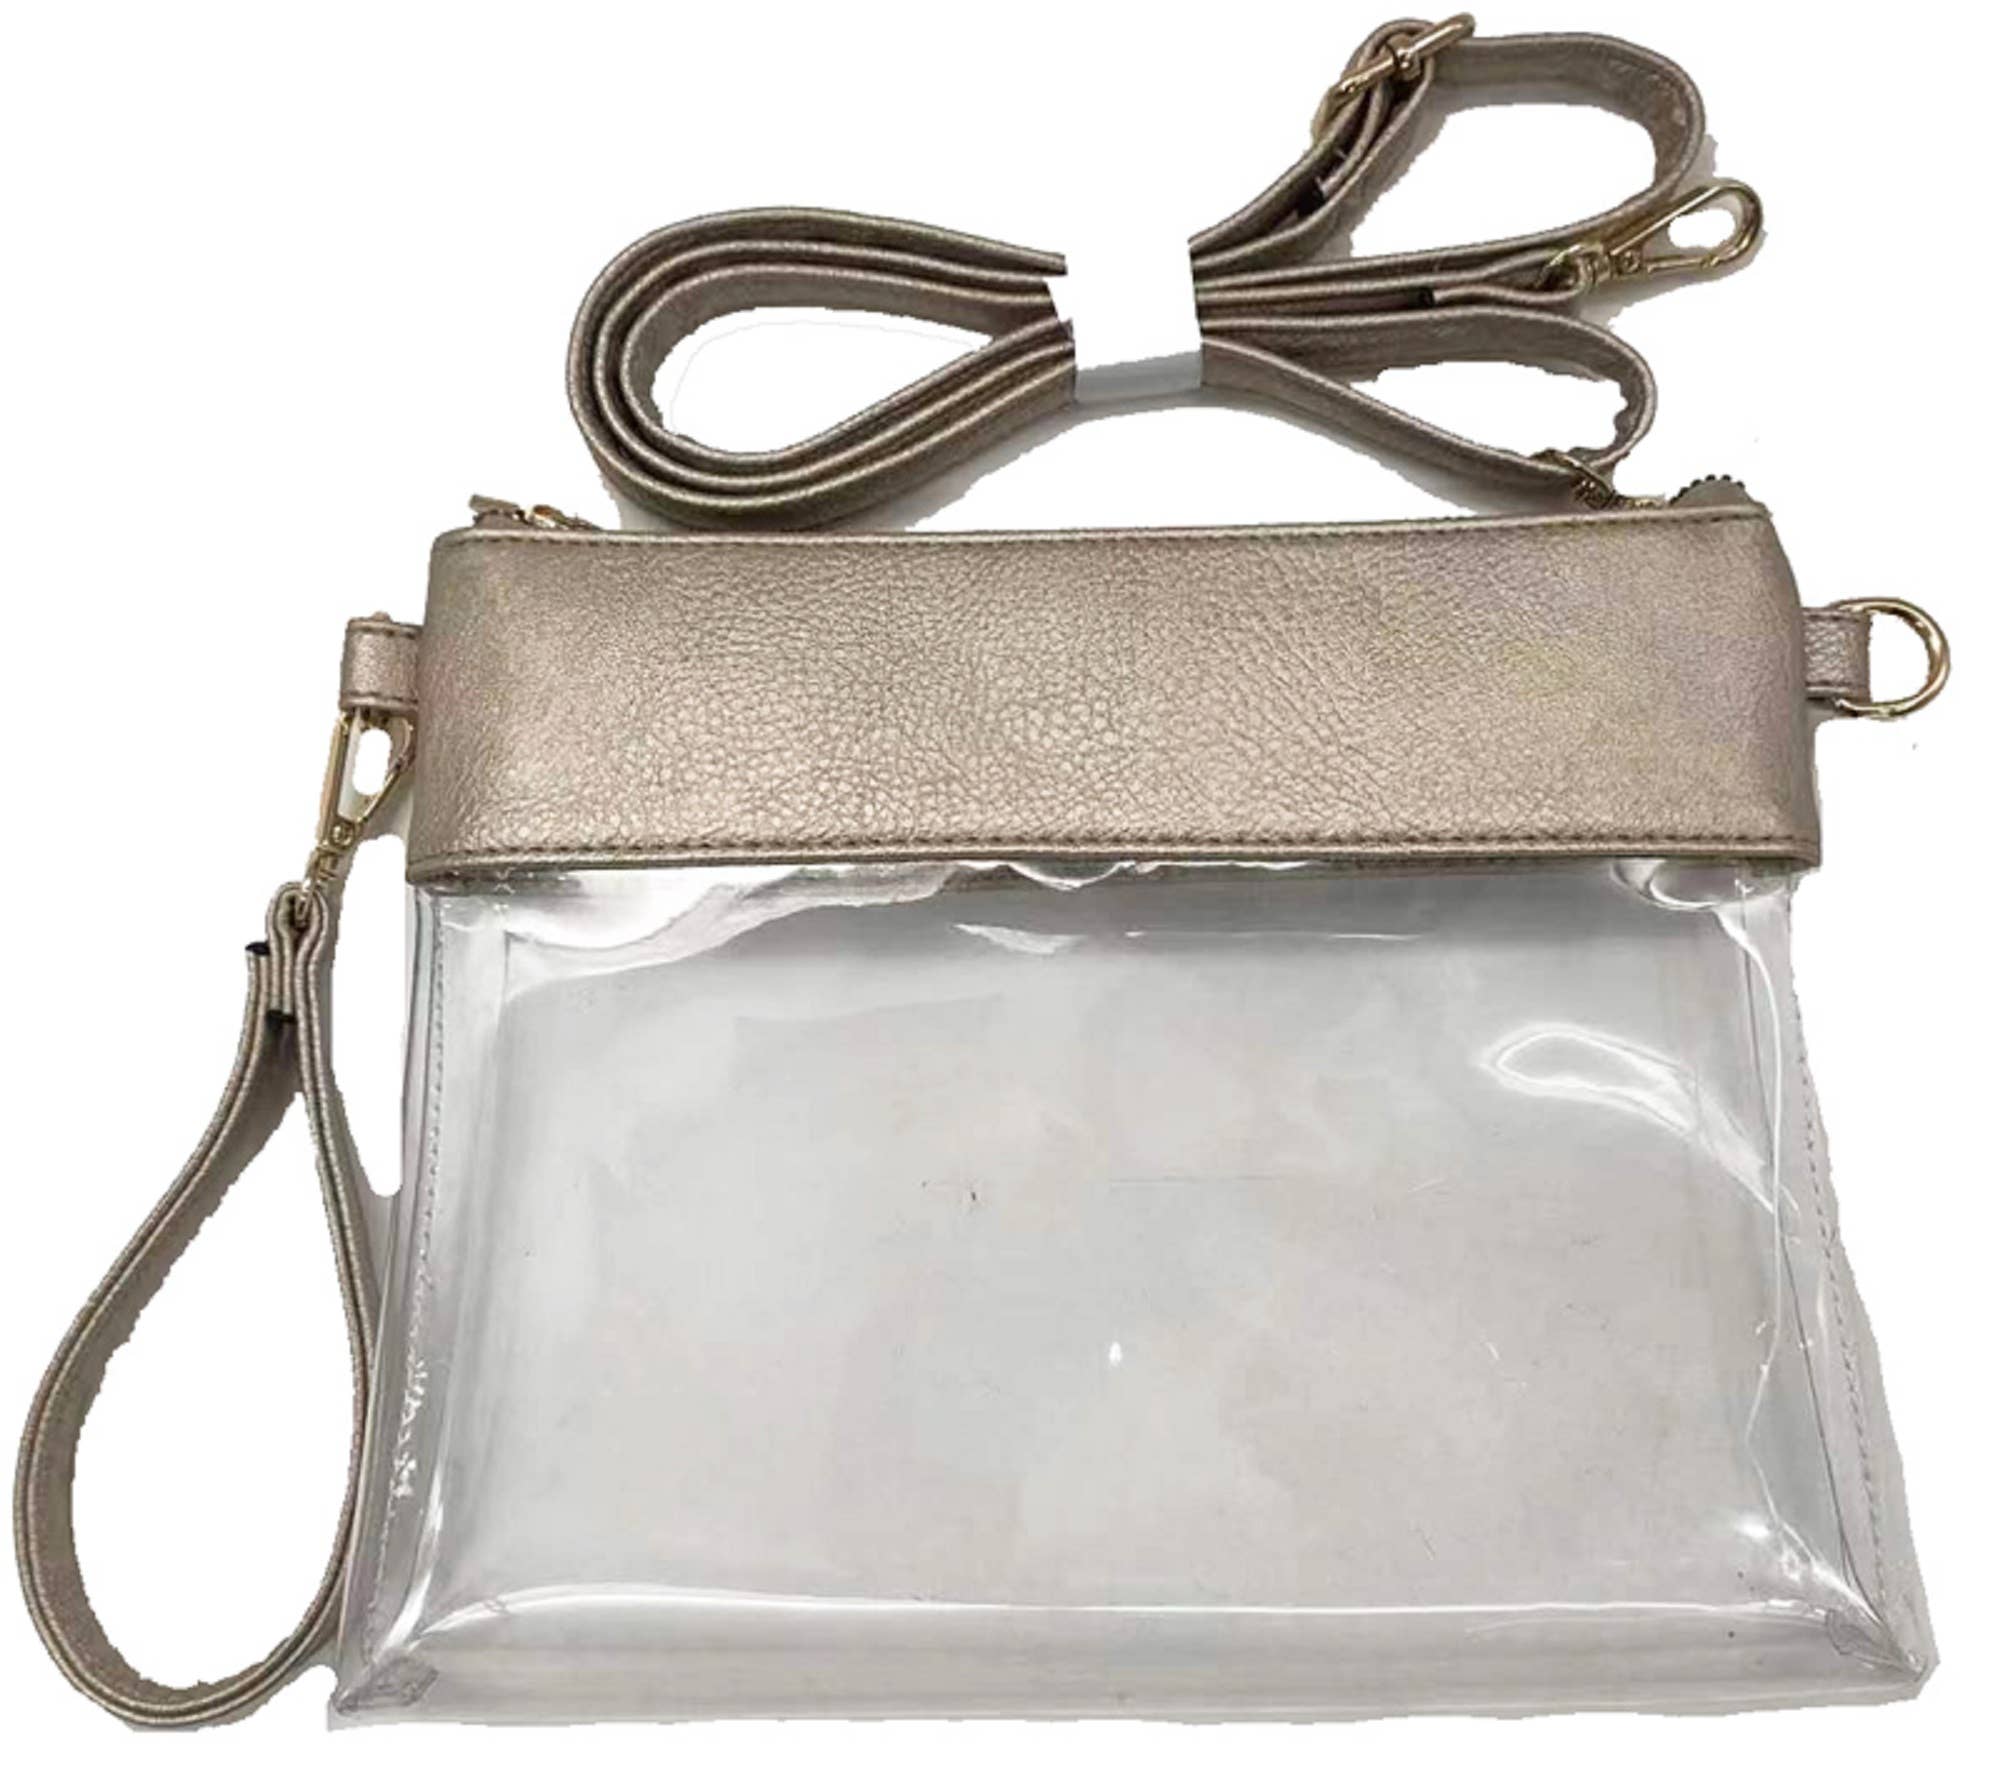 Clear Clutch Handbag for stadium and concert events. Features a clutch stap and a crossbody strap with champagne gold accents.